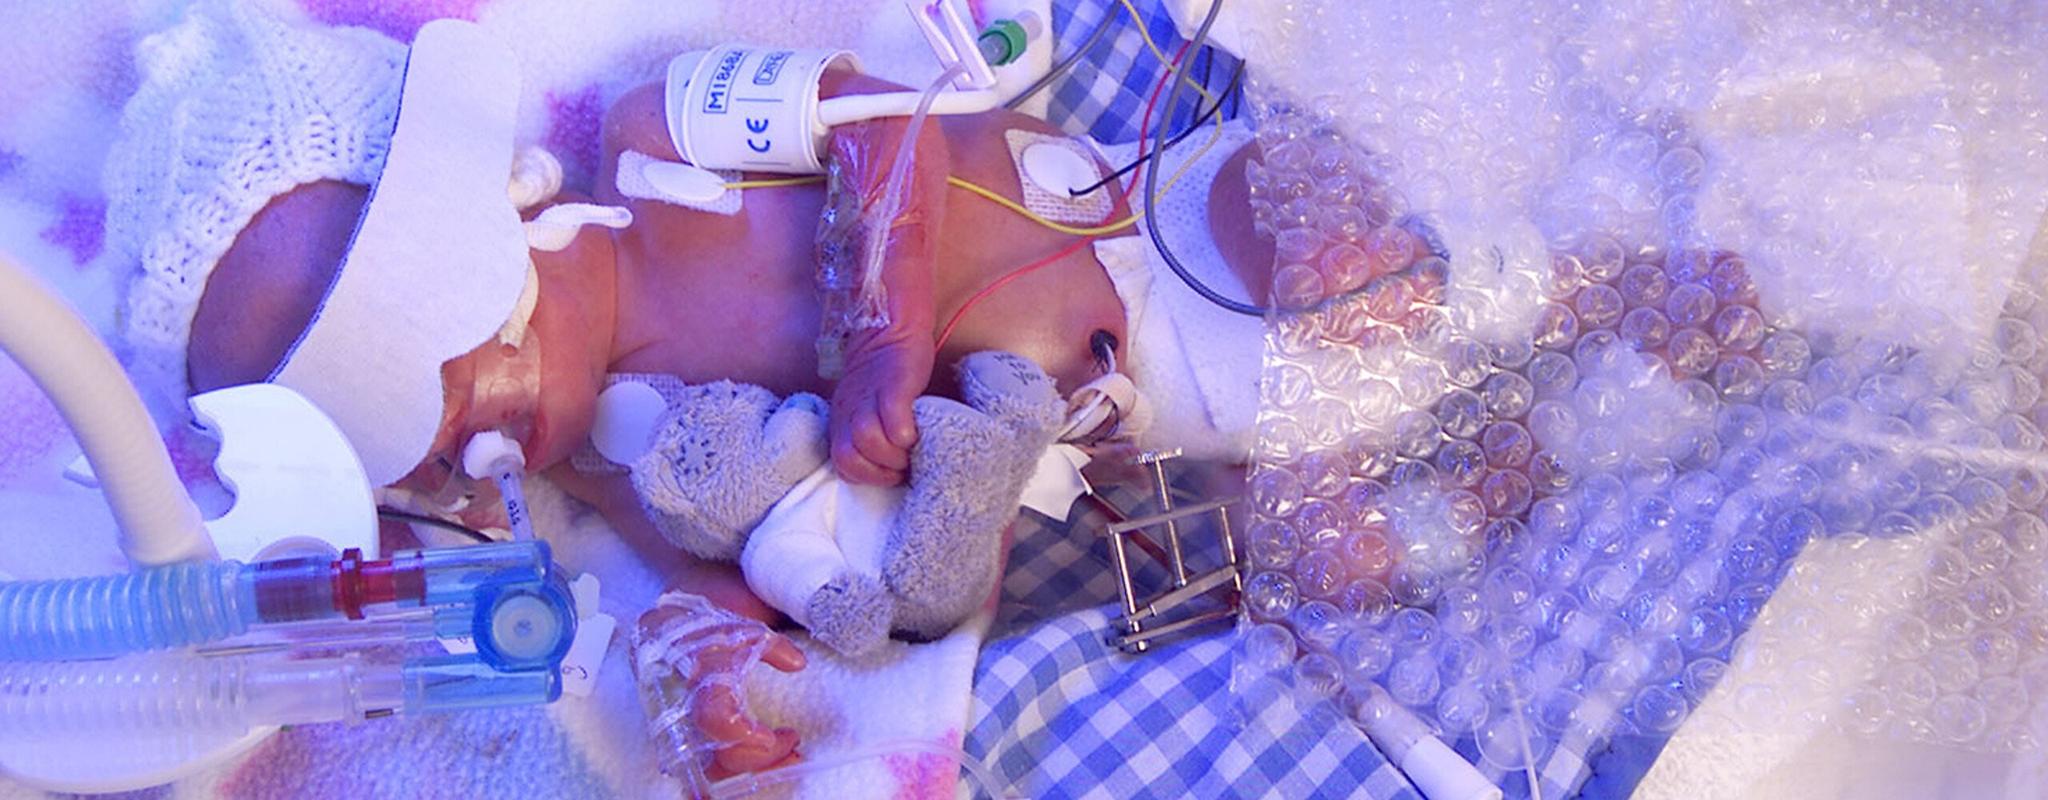 A photograph of a premature baby surrounded by medical equipment holding a teddy by Medical Illustration Department, Leicester Royal Infirmary.